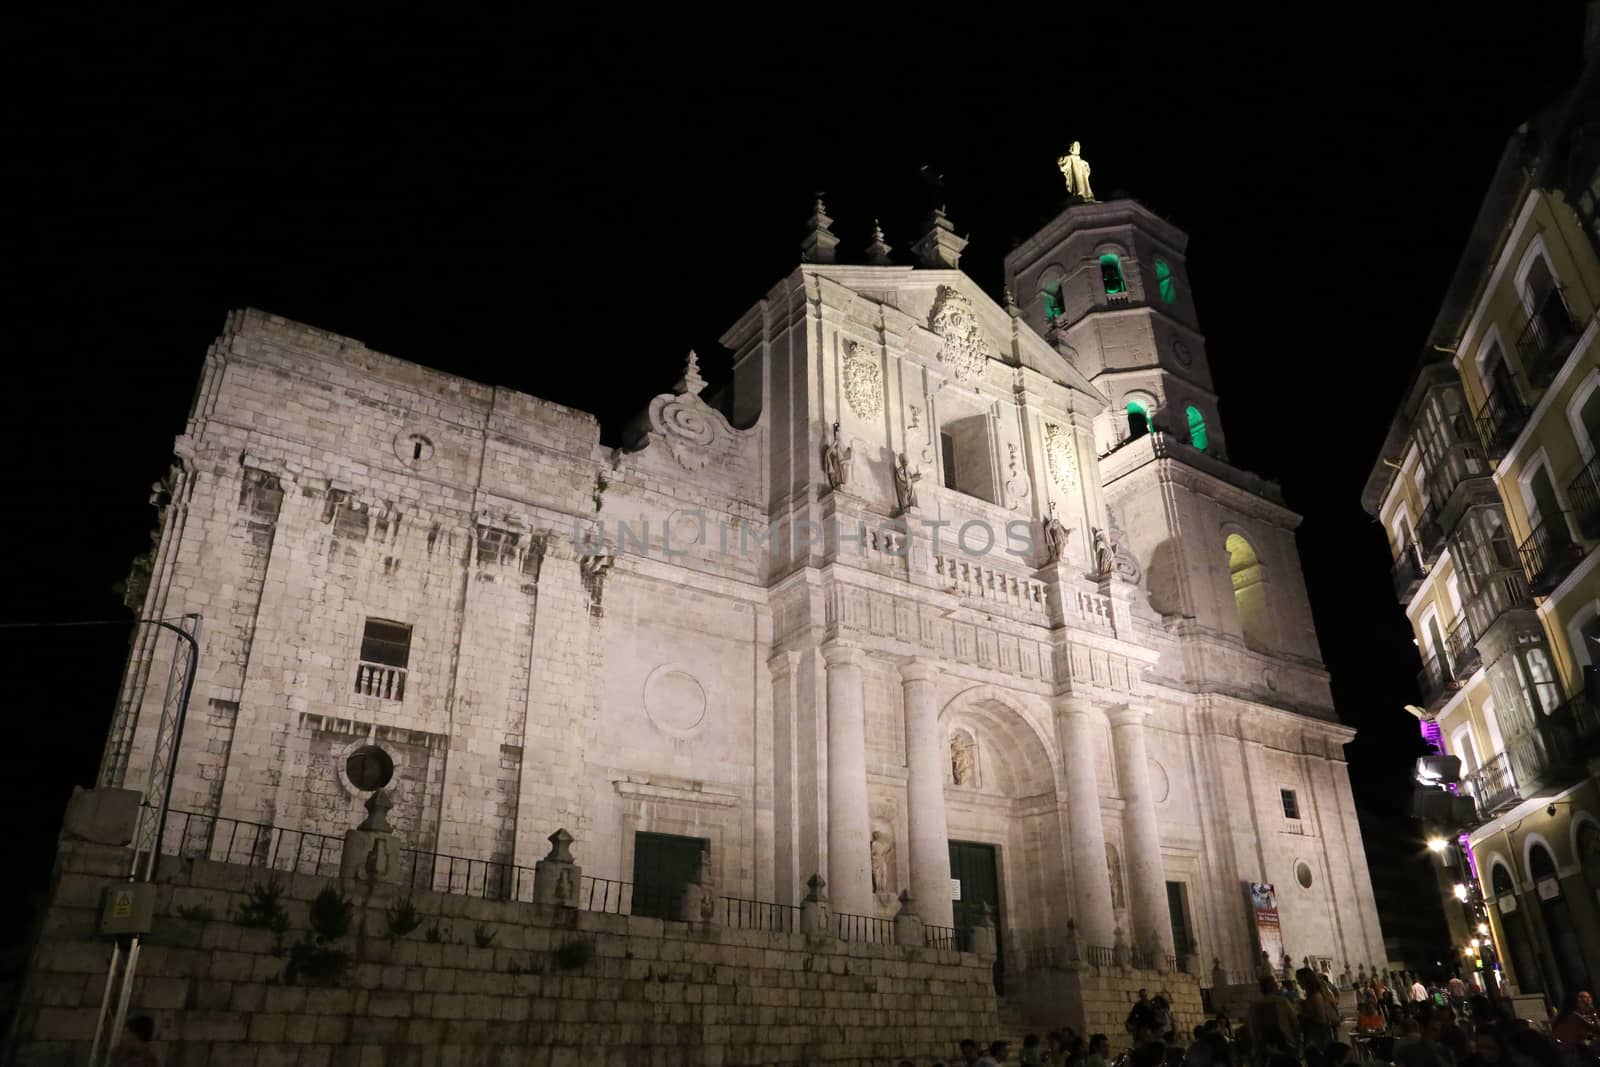 The illuminated Diocese church of Valladolid at night in Spain